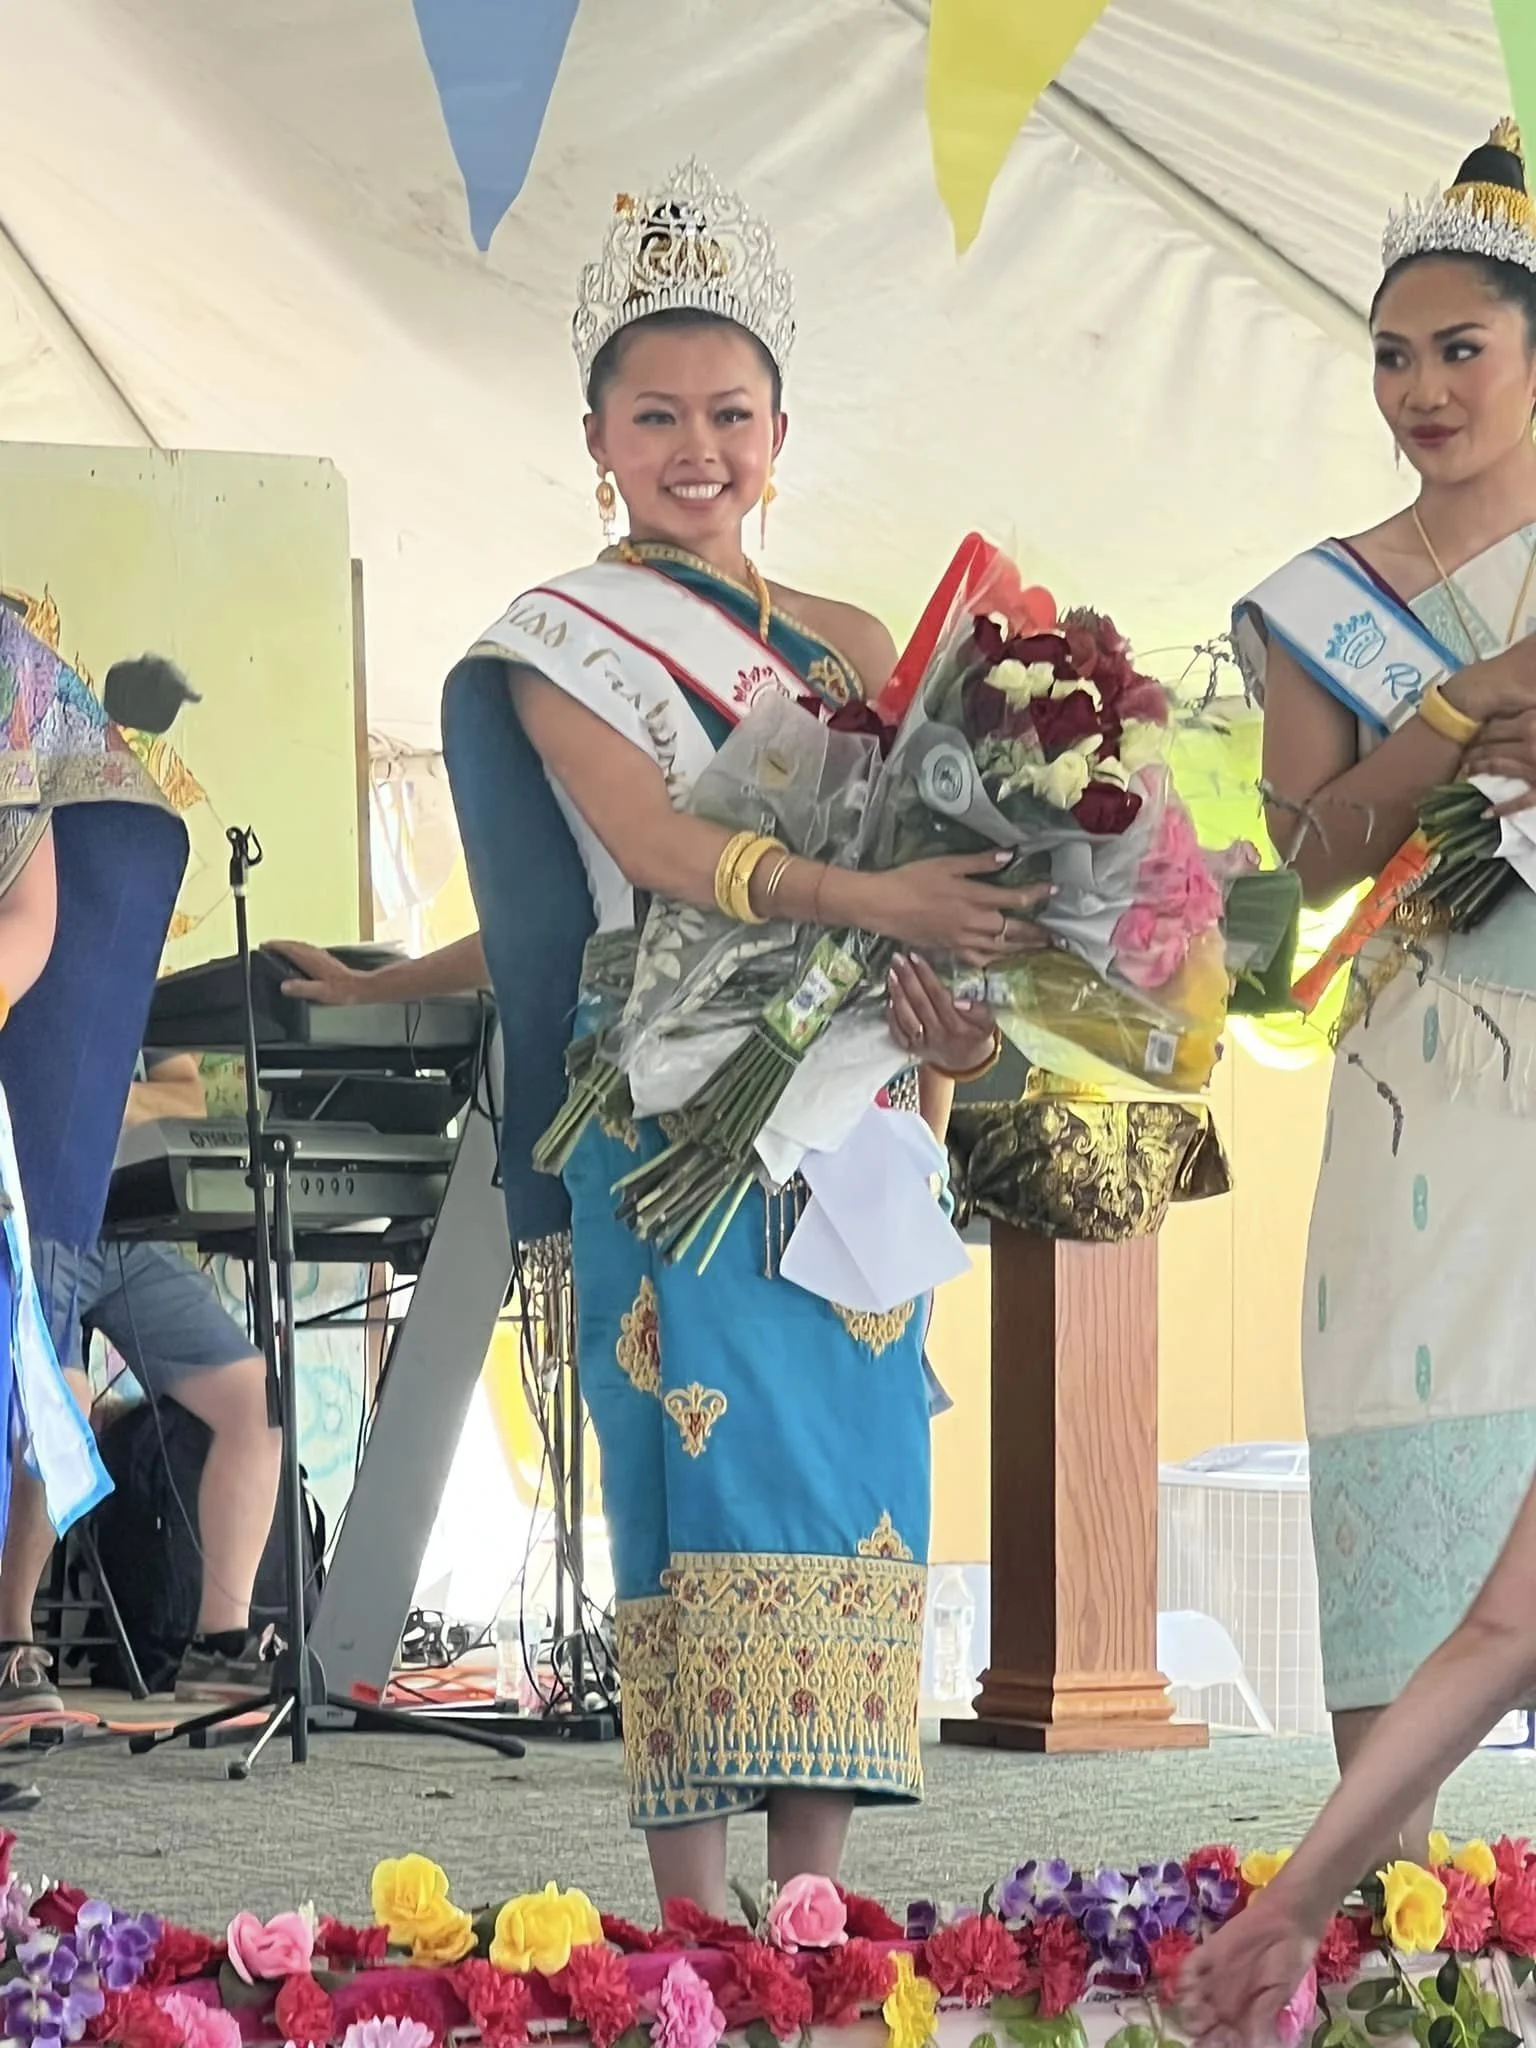 Cultural Traditions Shine at Memorial's Day Event.